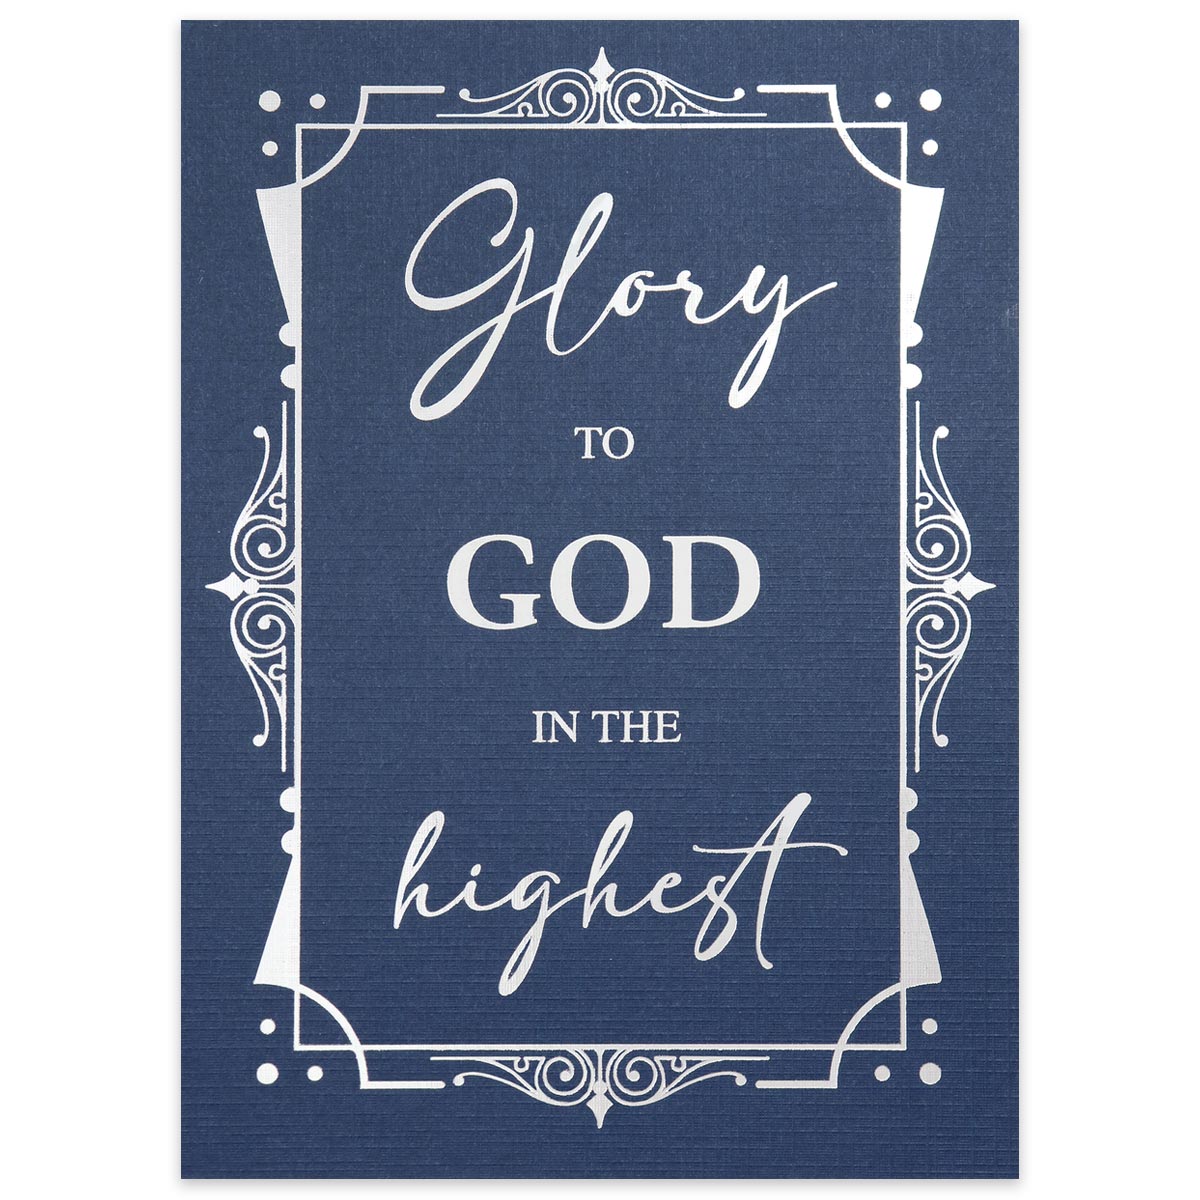 Textured blue Christmas card with matte silver foil imprint that reads, Glory to God in the highest and has a decorative border on the front cover.